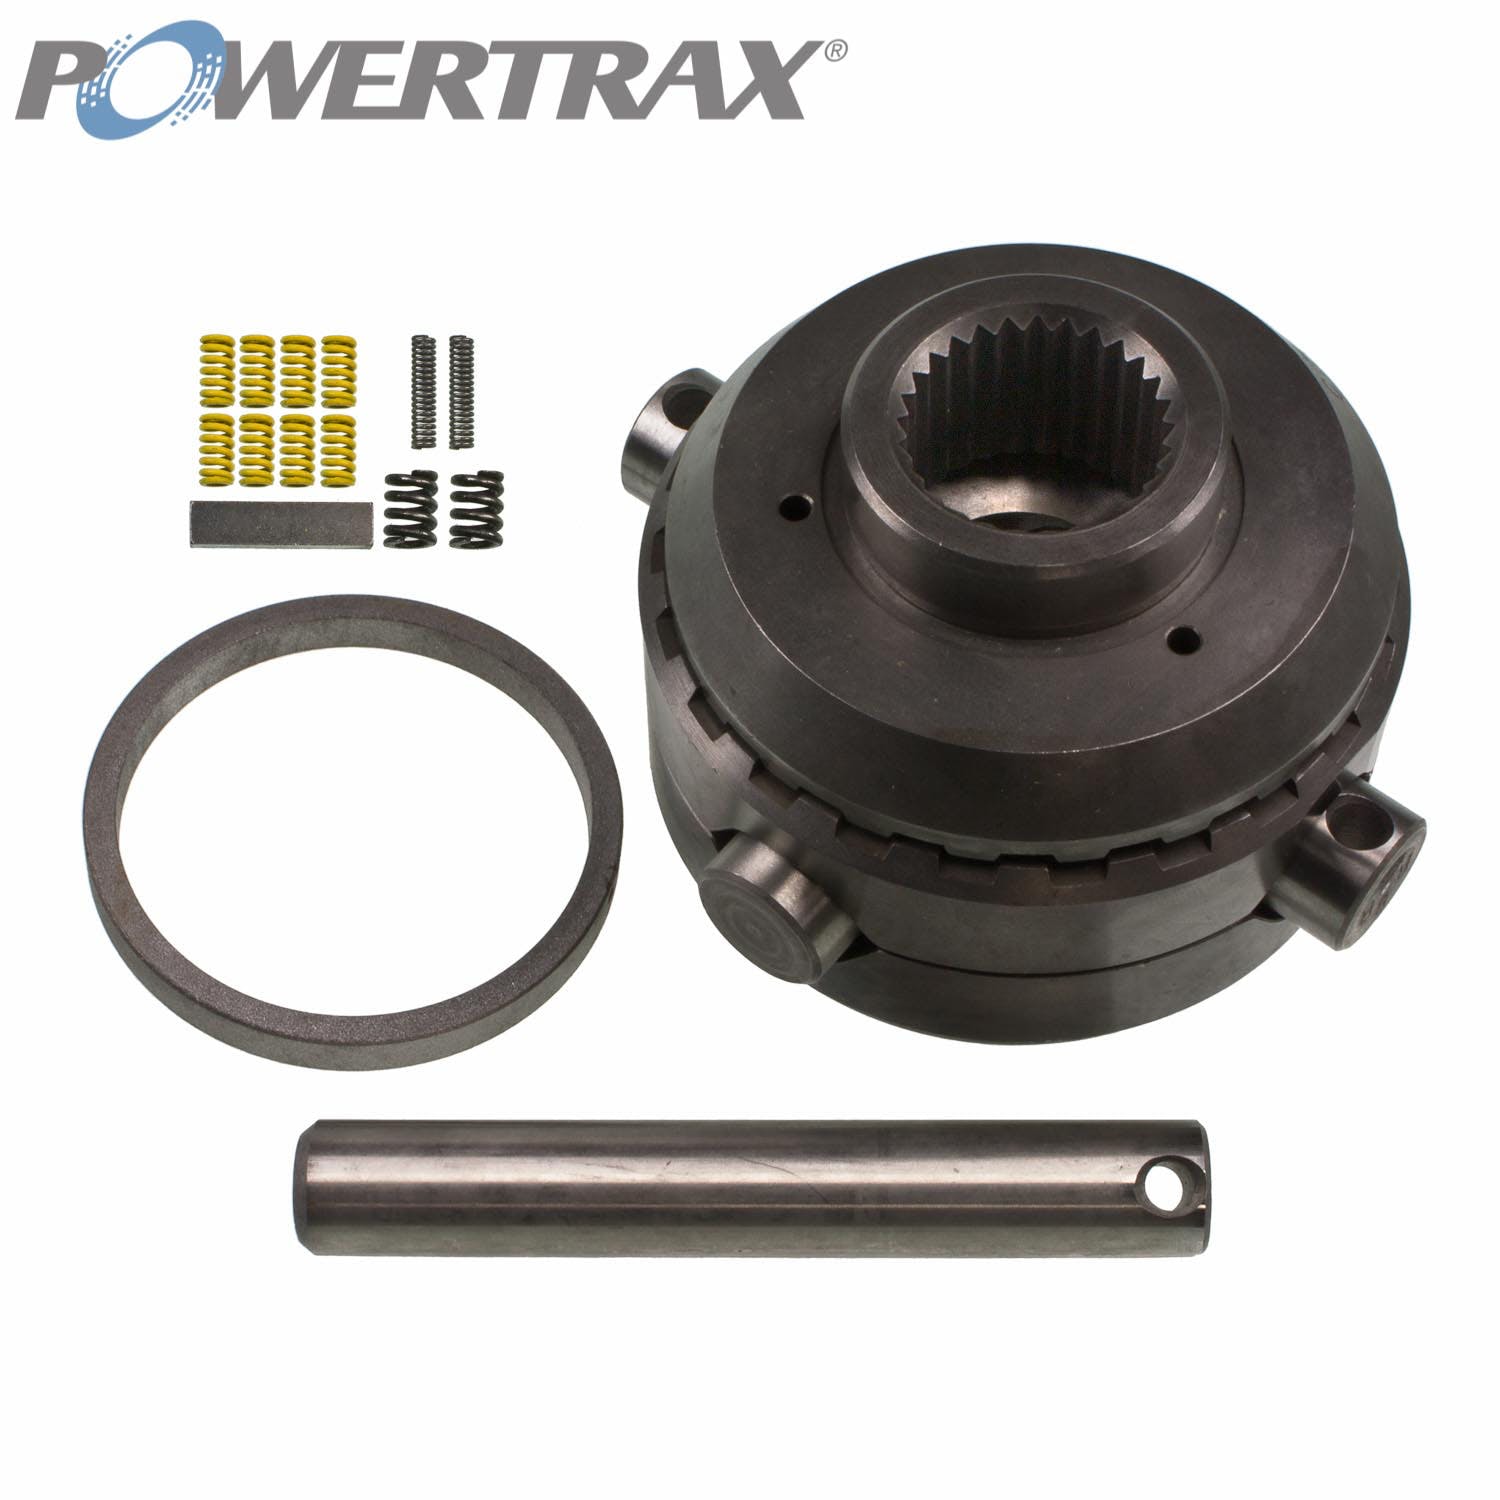 PowerTrax 9206902800 No-Slip Traction System